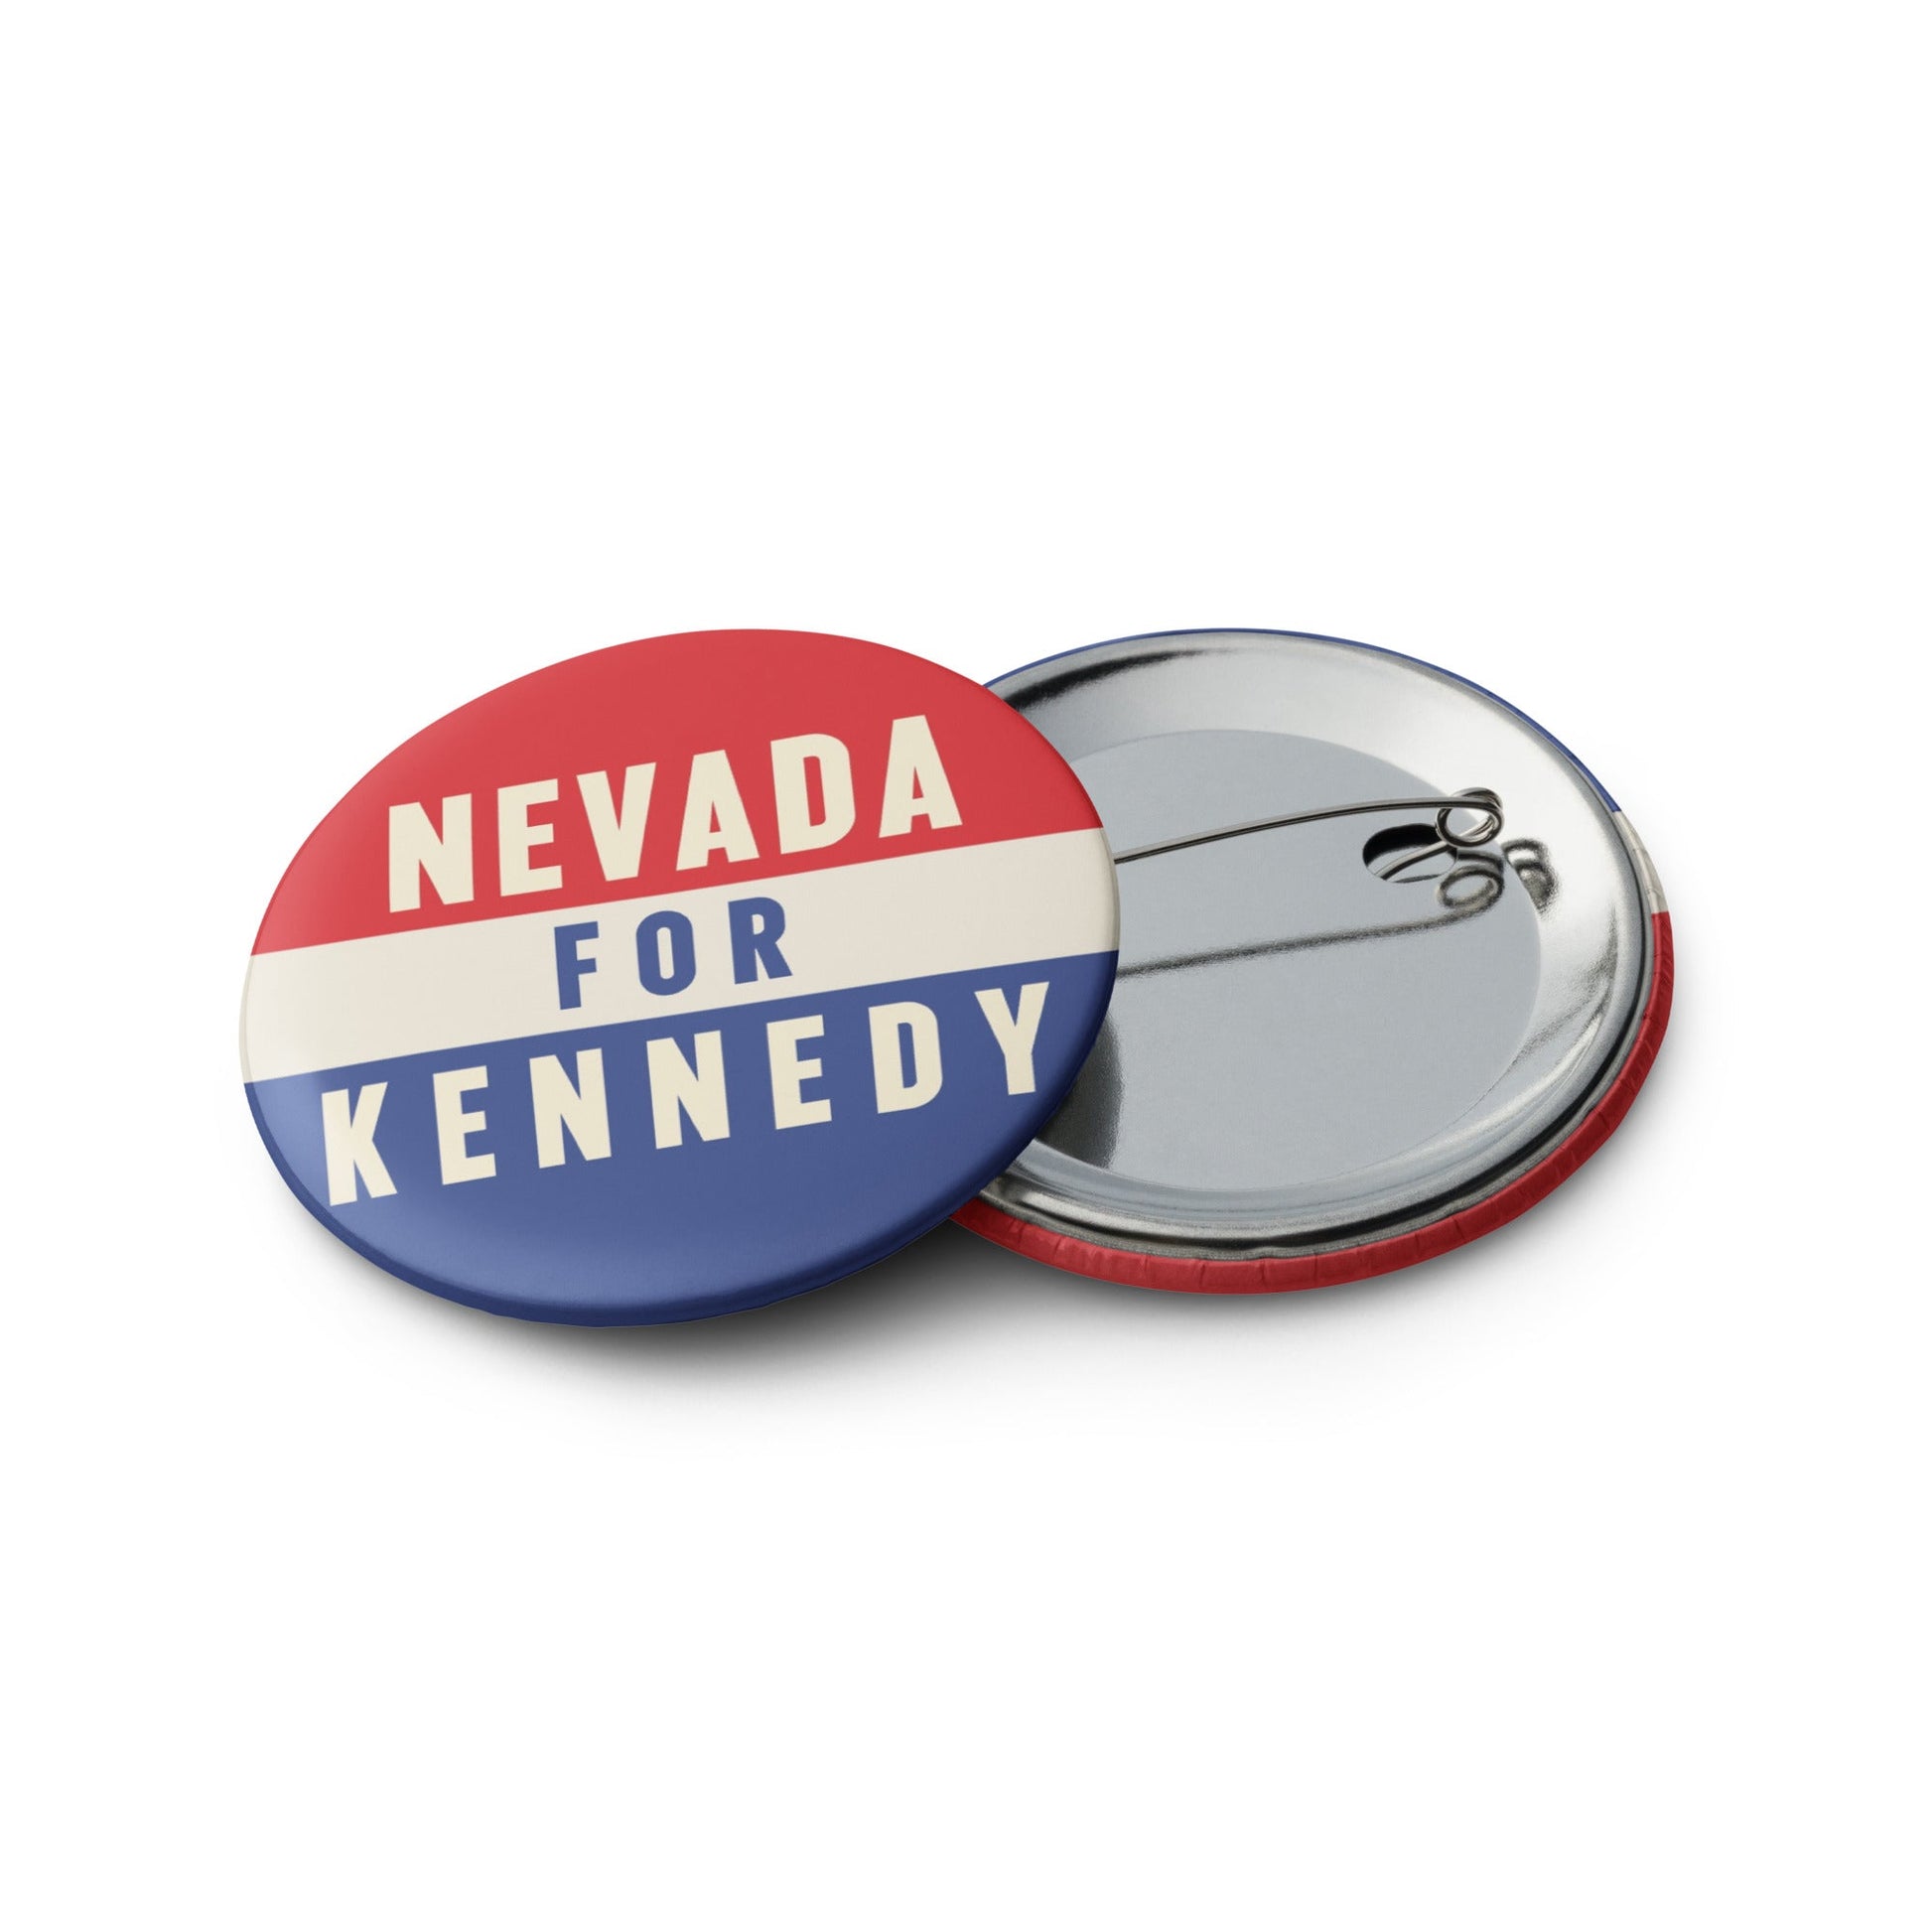 Nevada for Kennedy (5 Buttons) - TEAM KENNEDY. All rights reserved